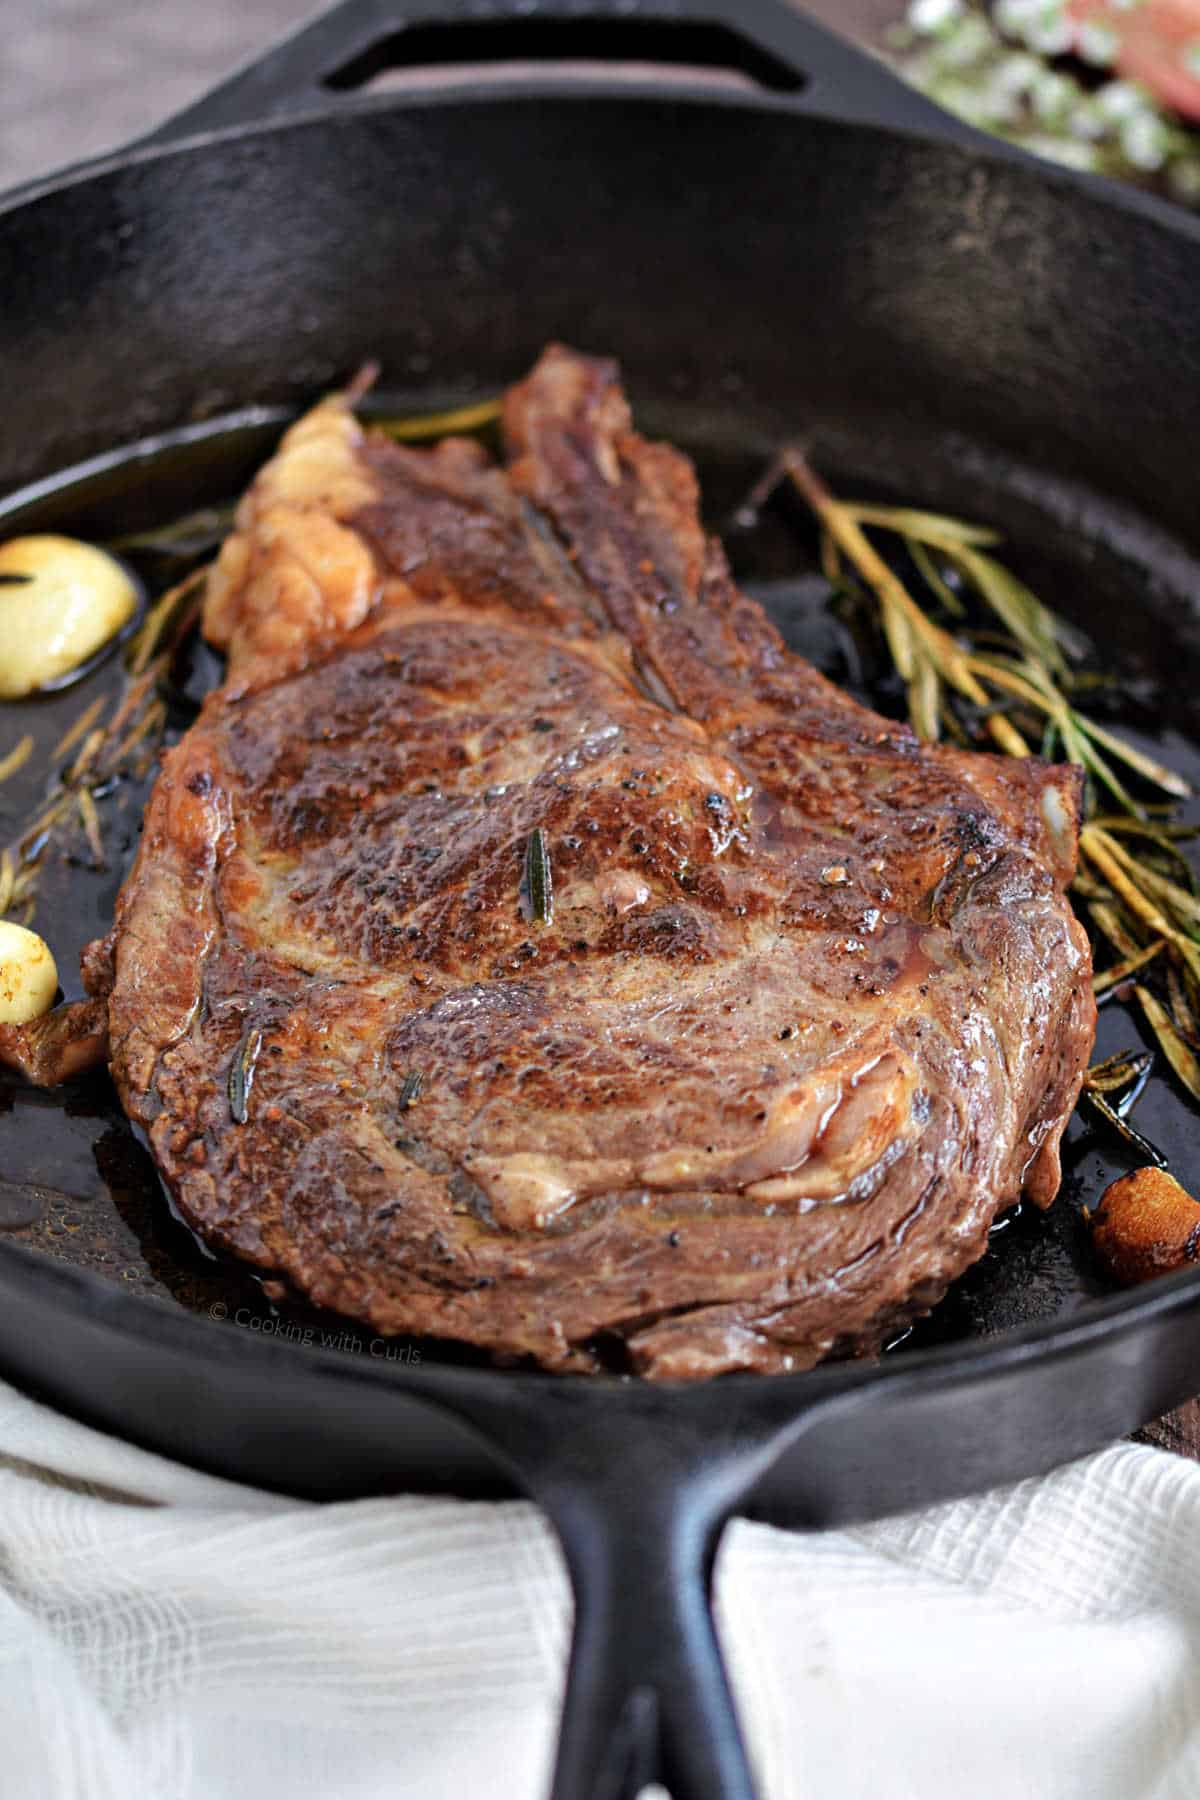 Pan-seared ribeye steak cooked in a cast iron skillet with garlic and herbs.